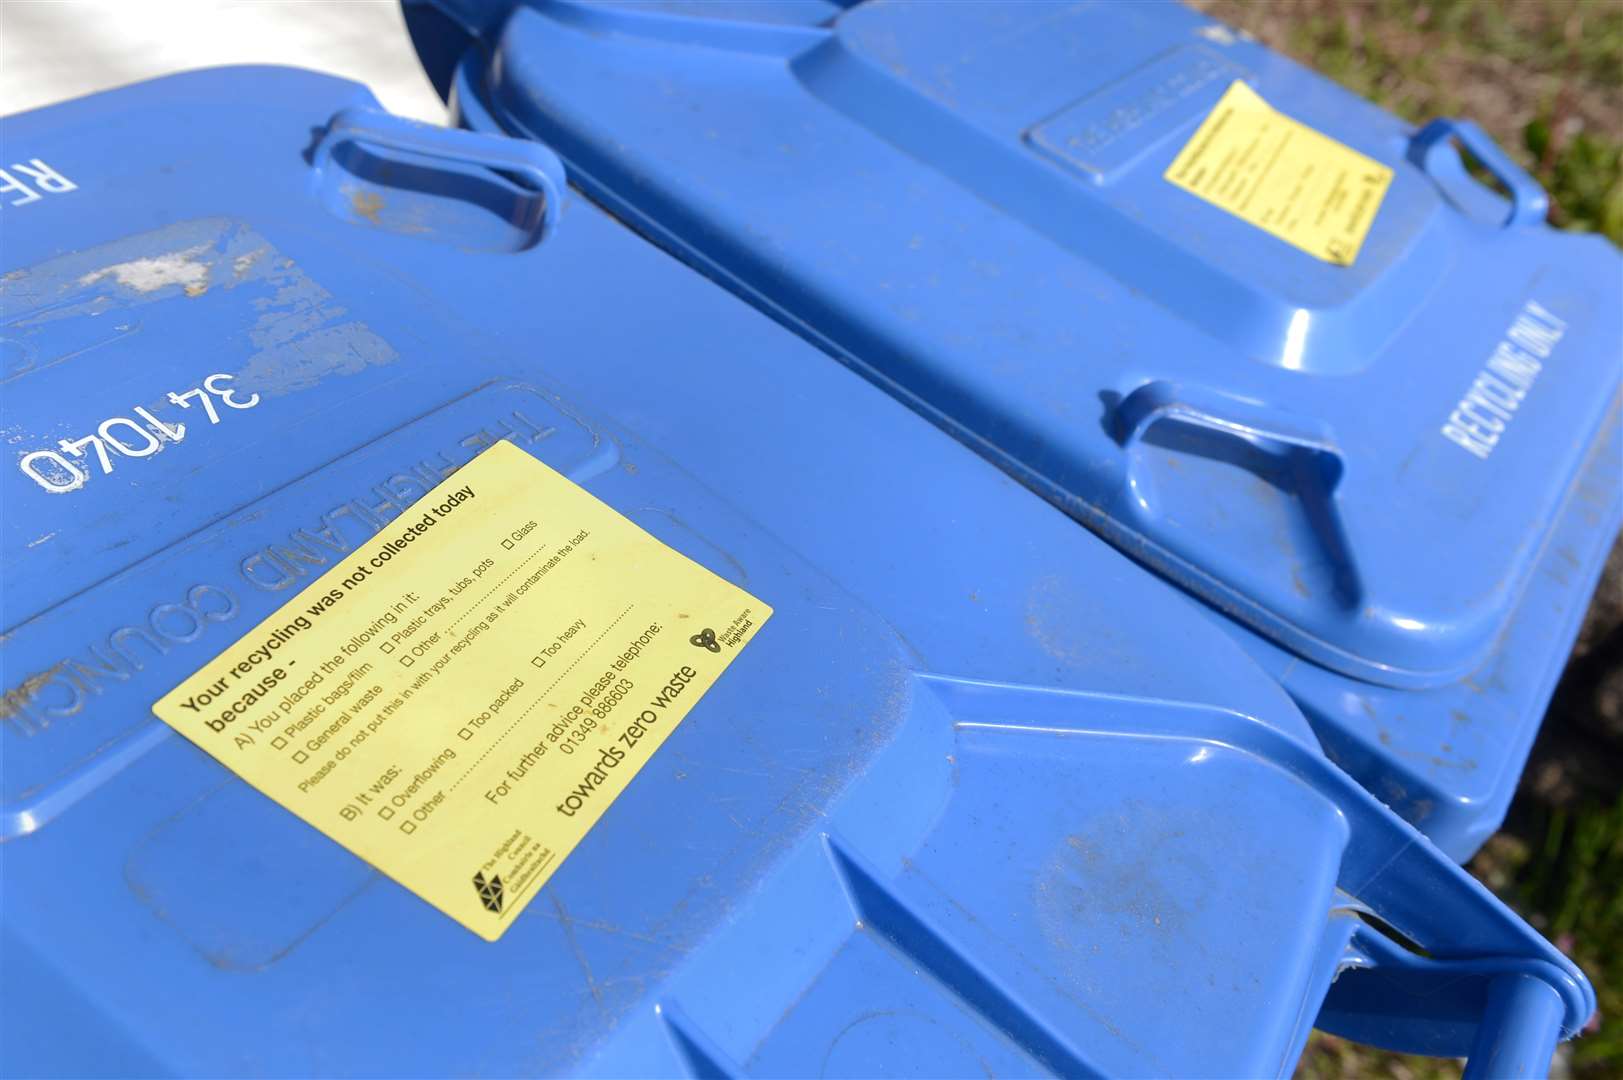 Highland still lags behind other areas when it comes to recycling.